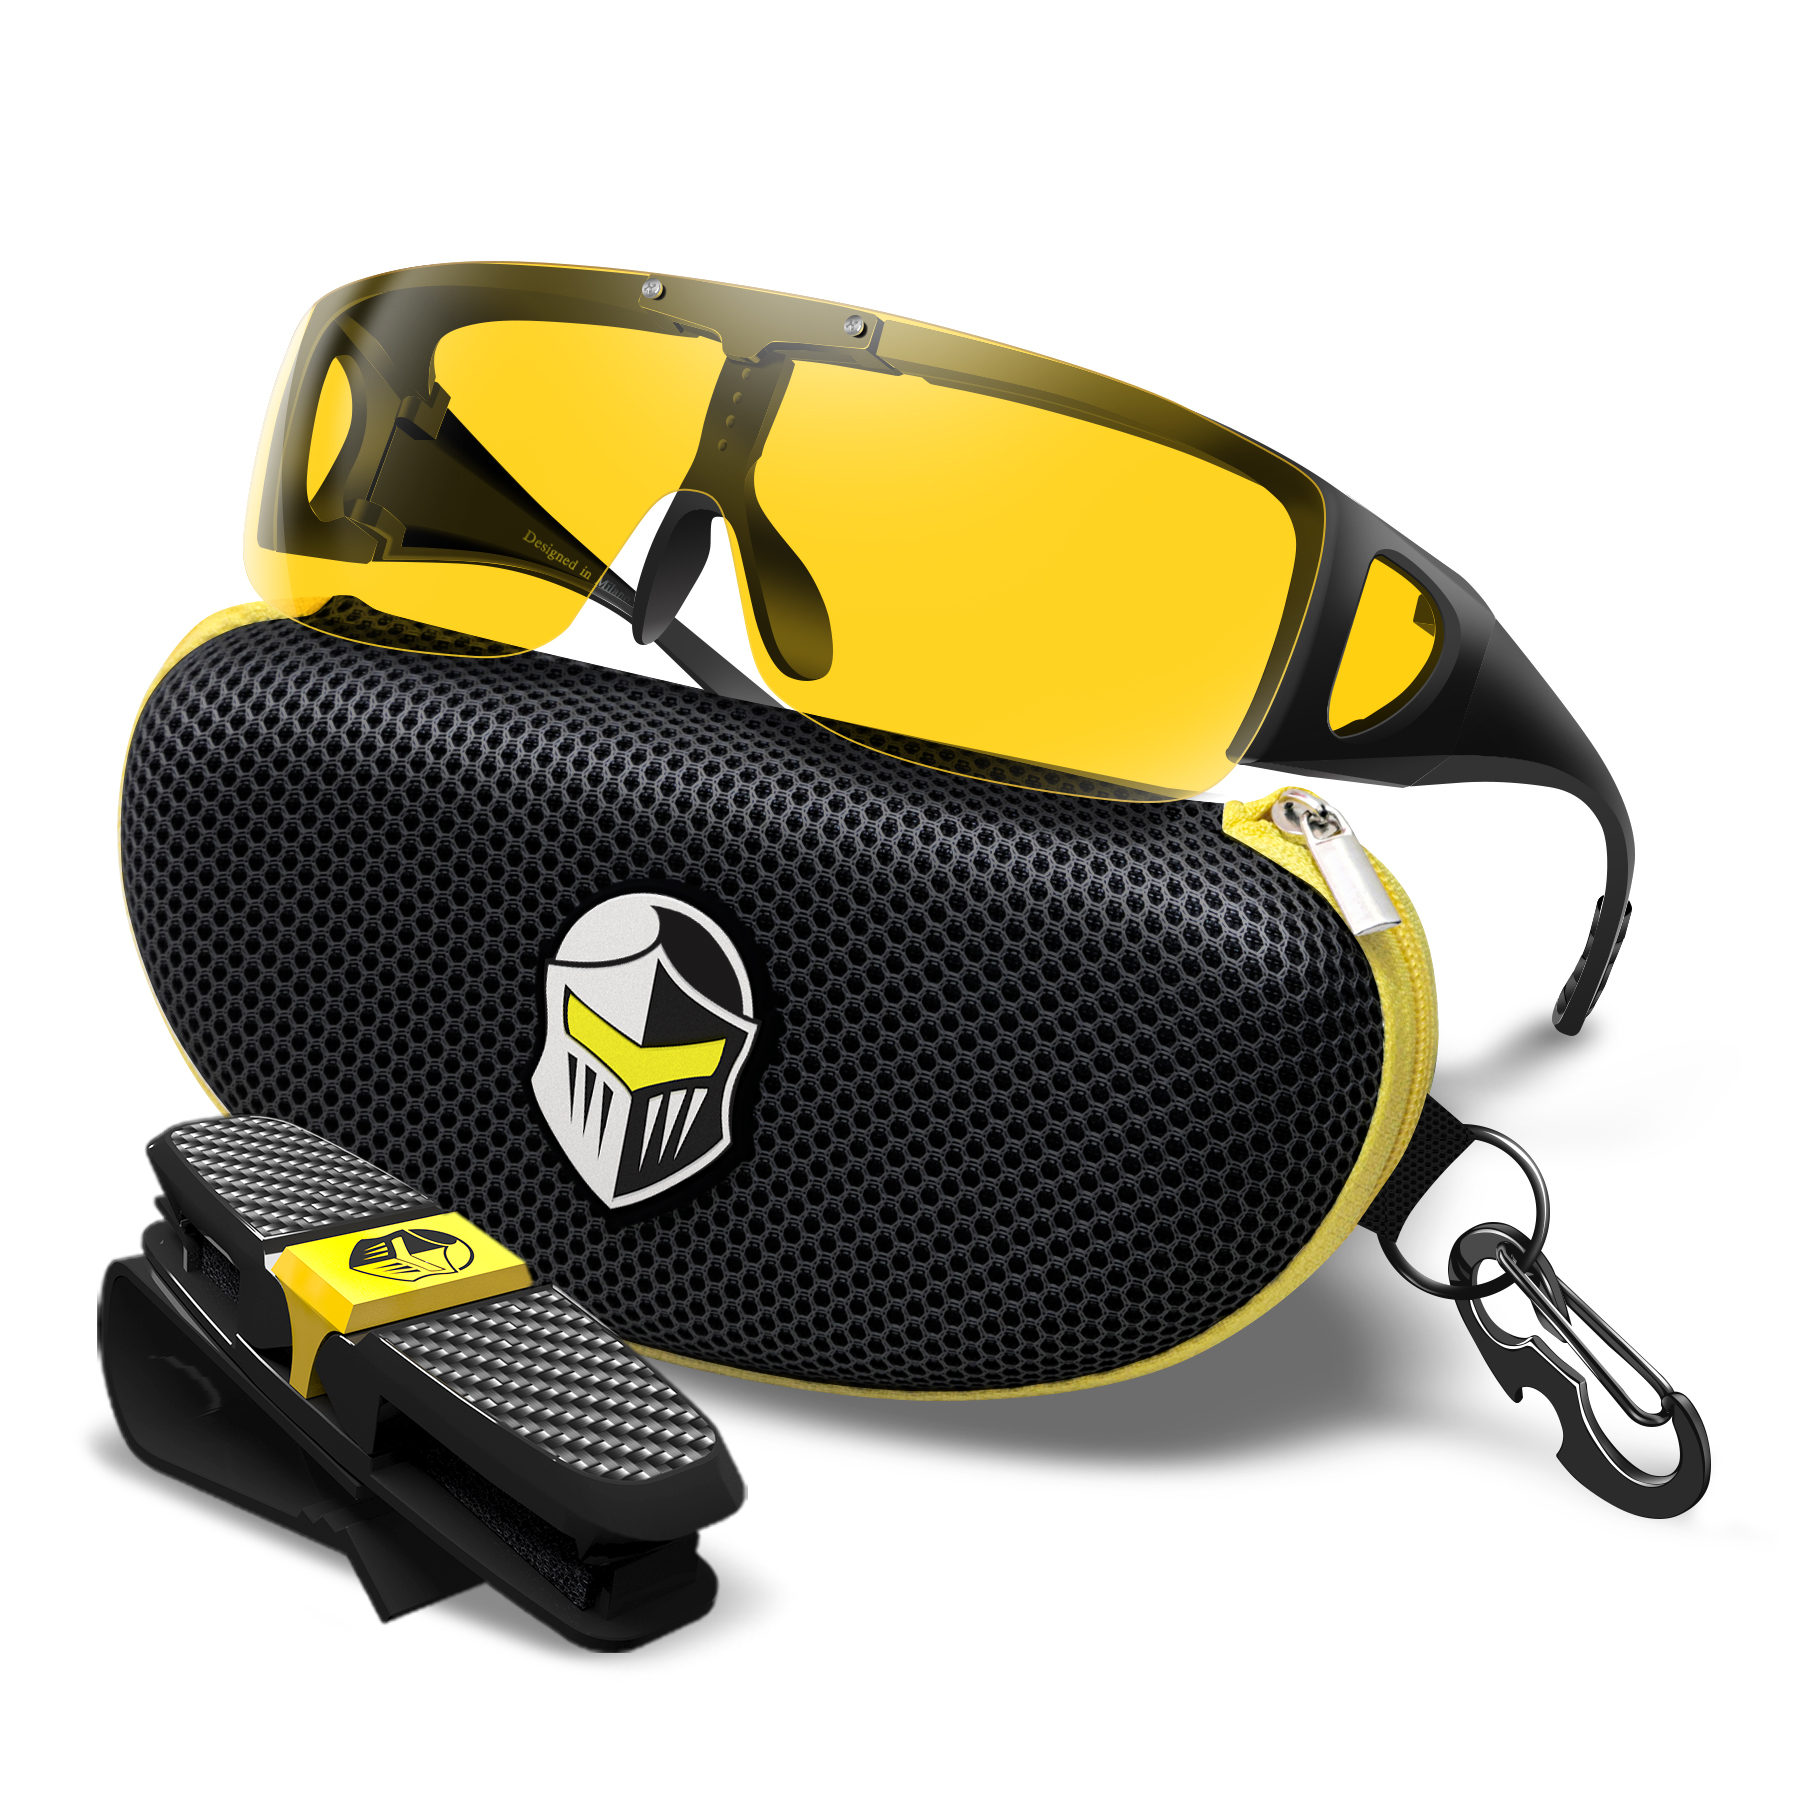 BLUPOND Fit Over Sunglasses Wrap Around Glasses Yellow B 